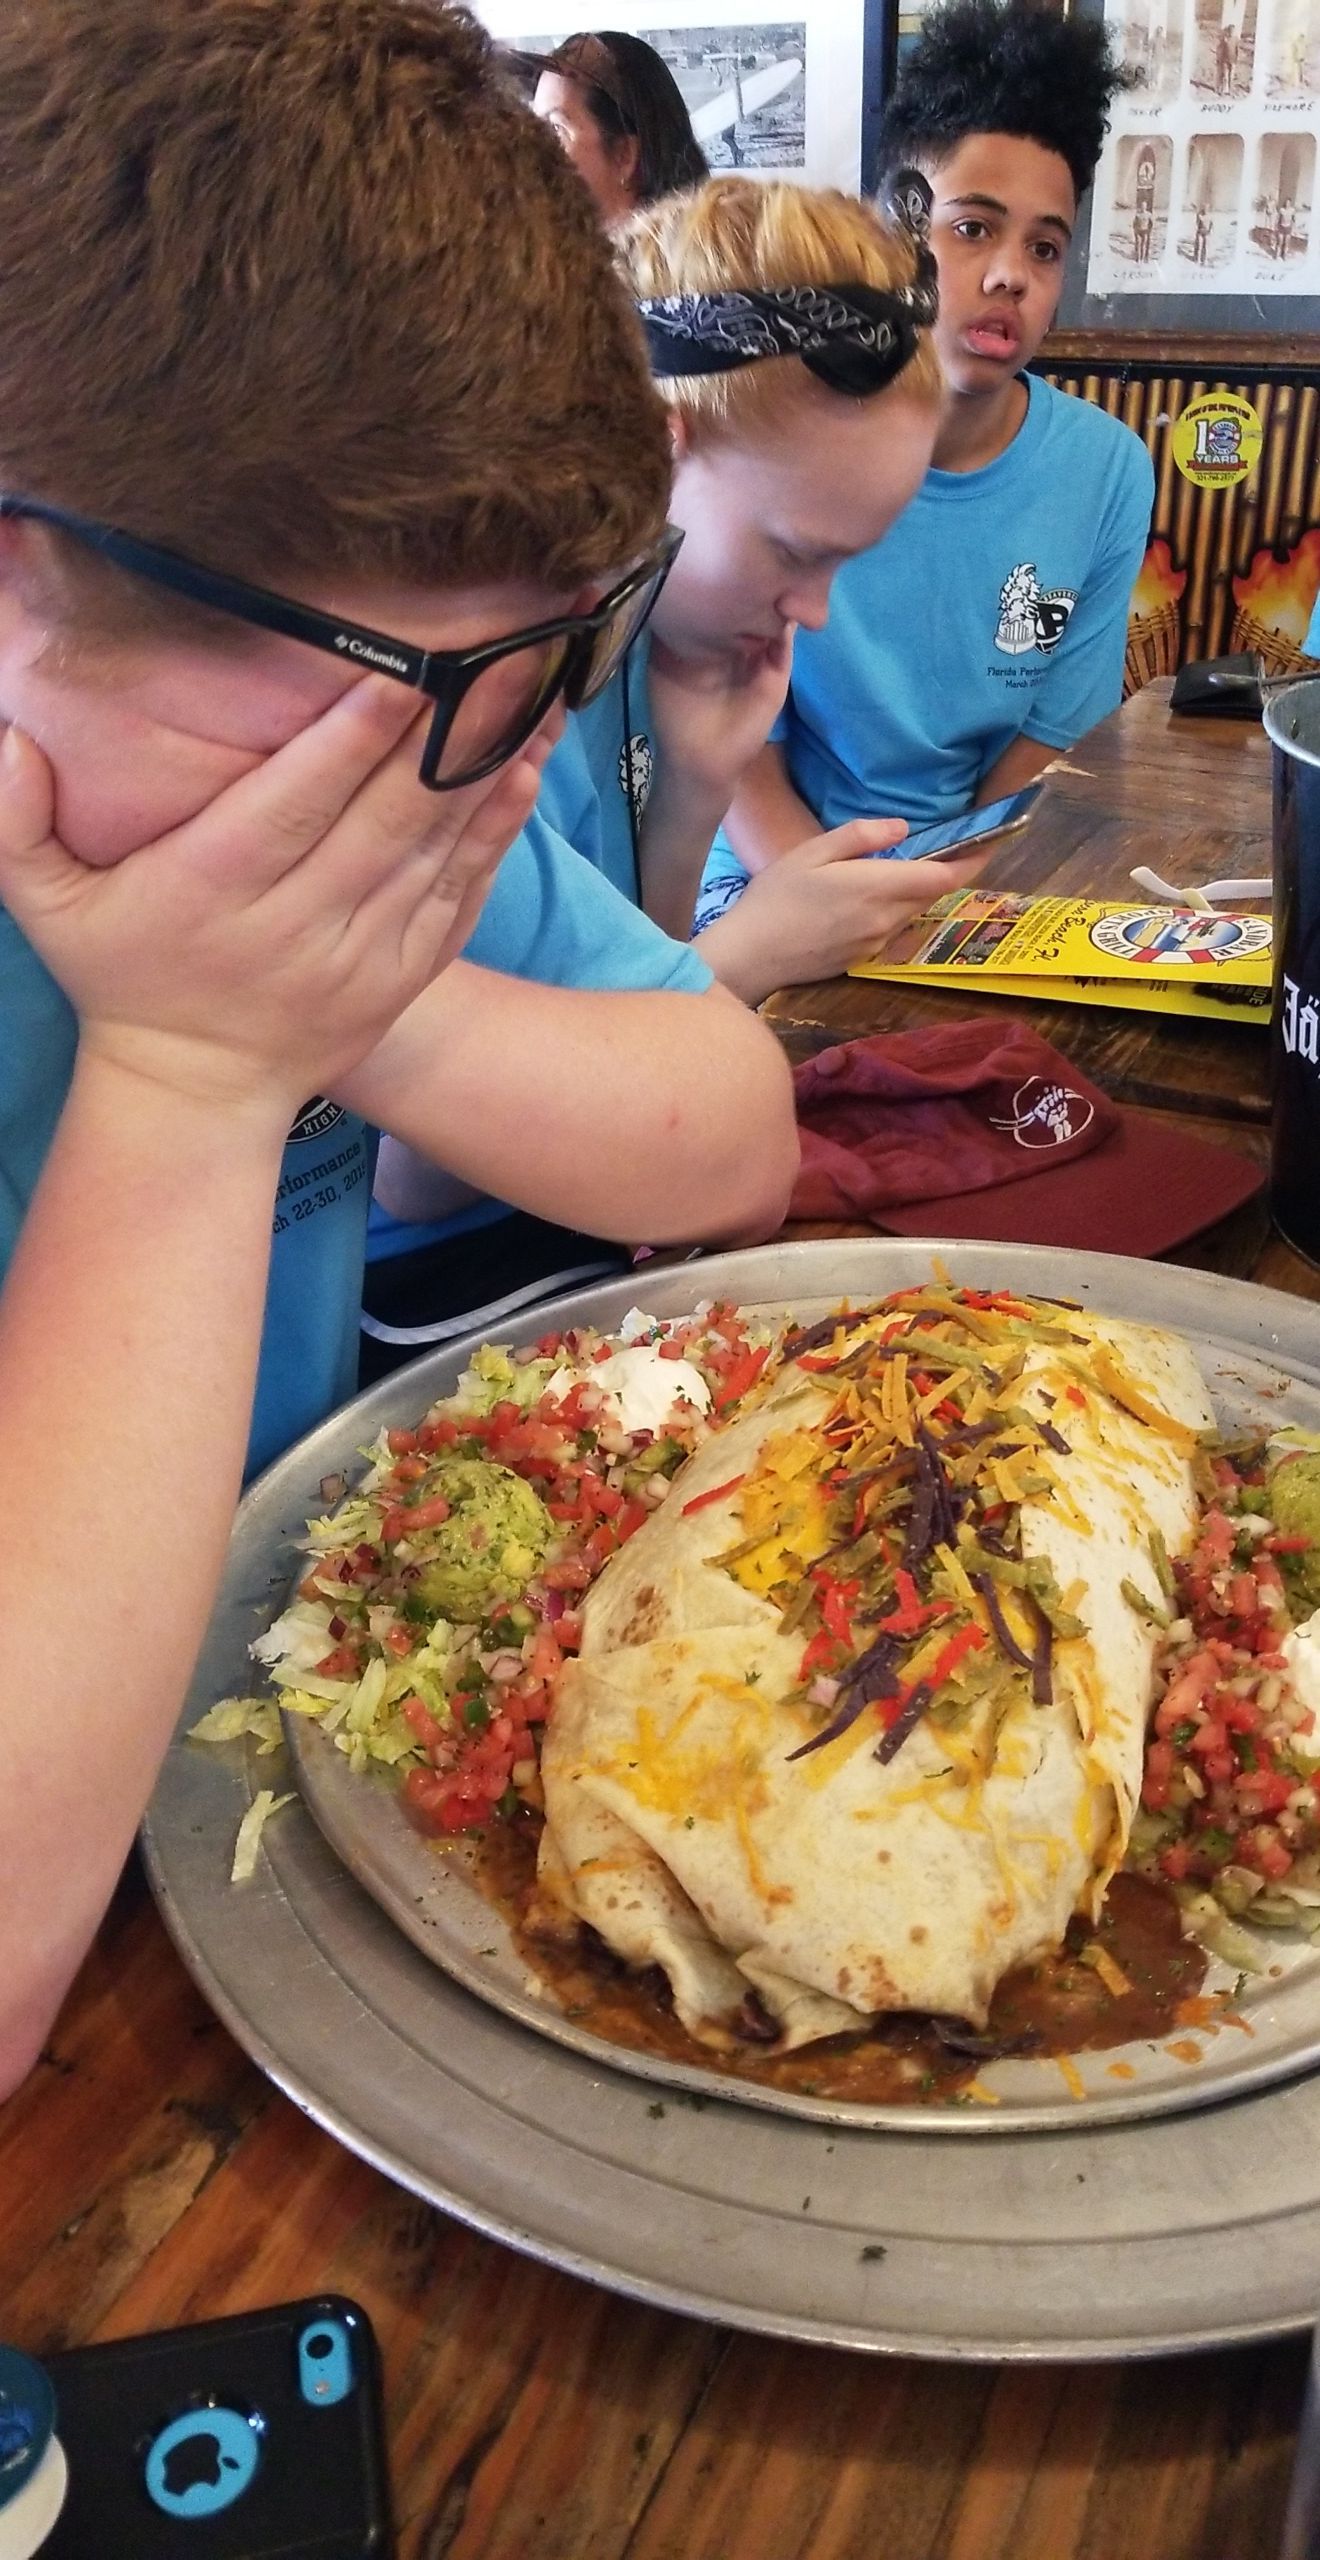 "5 lbs. isn't that much, I can definitely eat this burrito" he said, looking at the menu confidently. Oh how wrong he was.